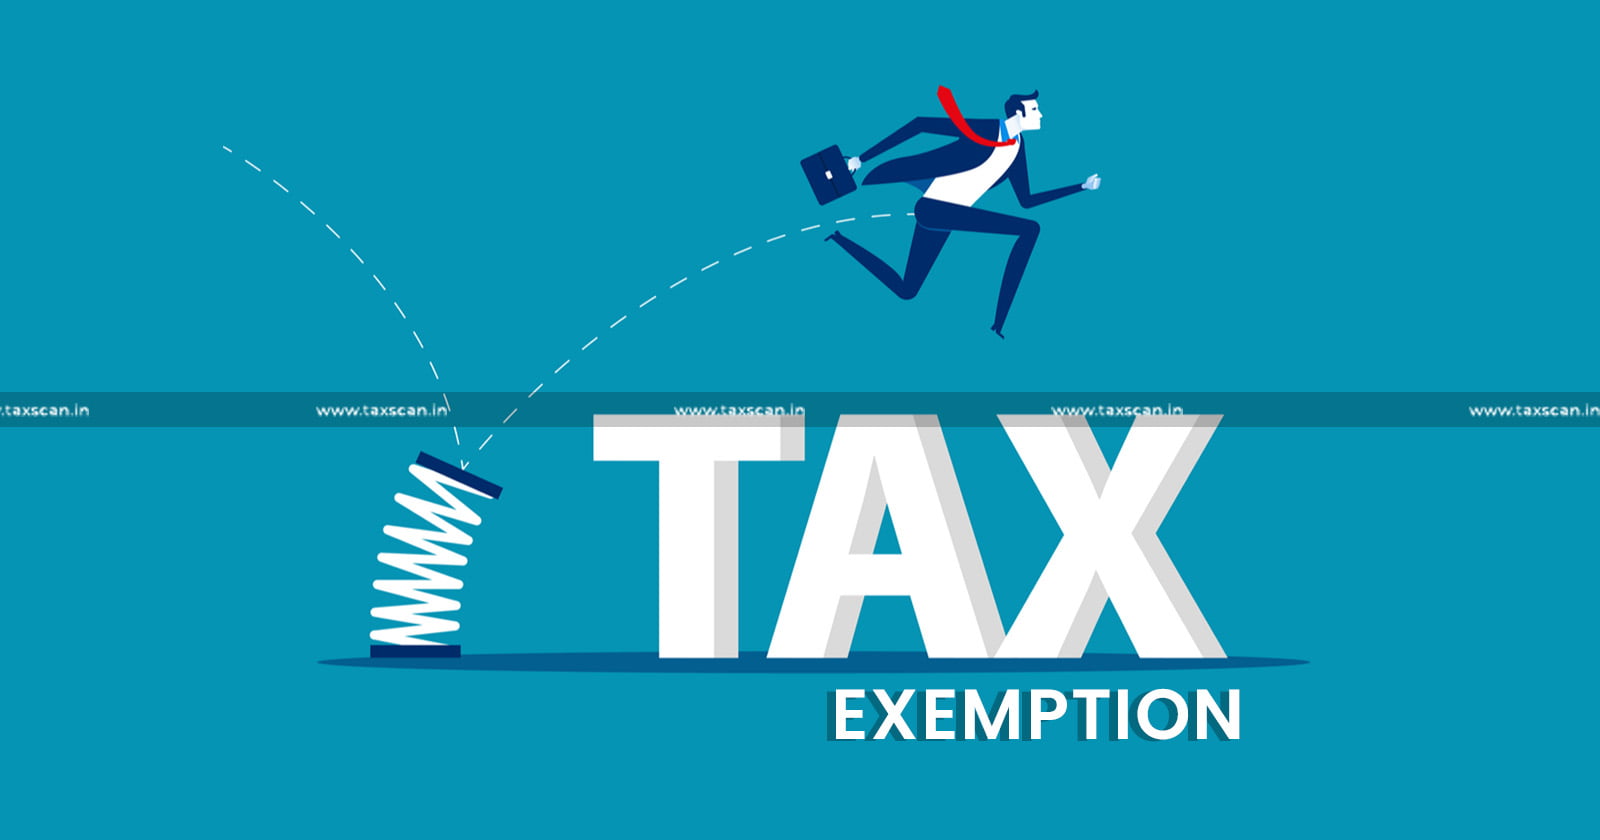 Central Board of Direct Taxes - CBDT -Income tax exemption - TAXSCAN